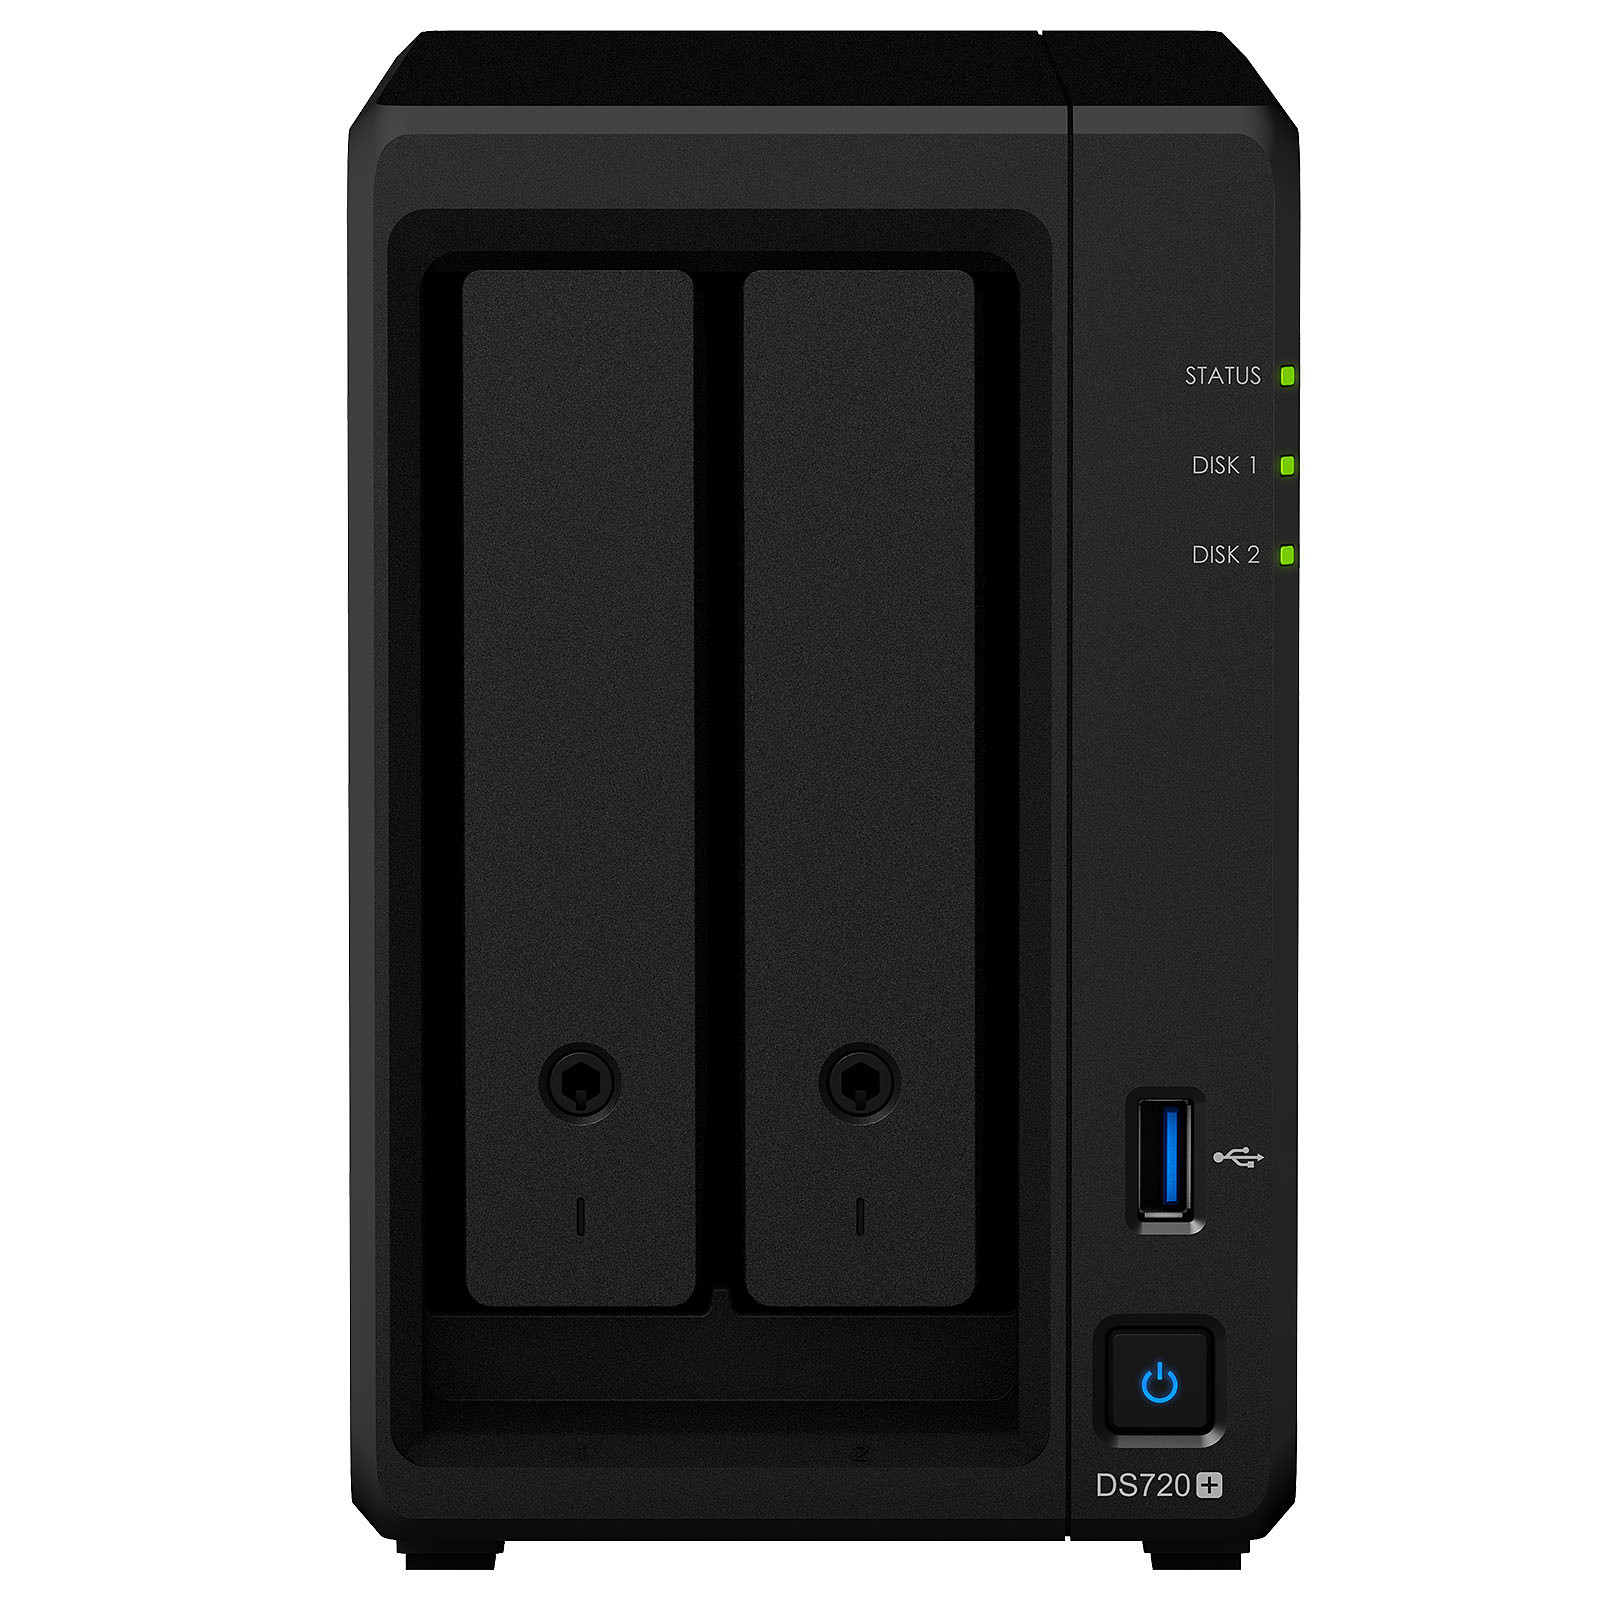 Synology DiskStation DS720+ - Serveur NAS Synology